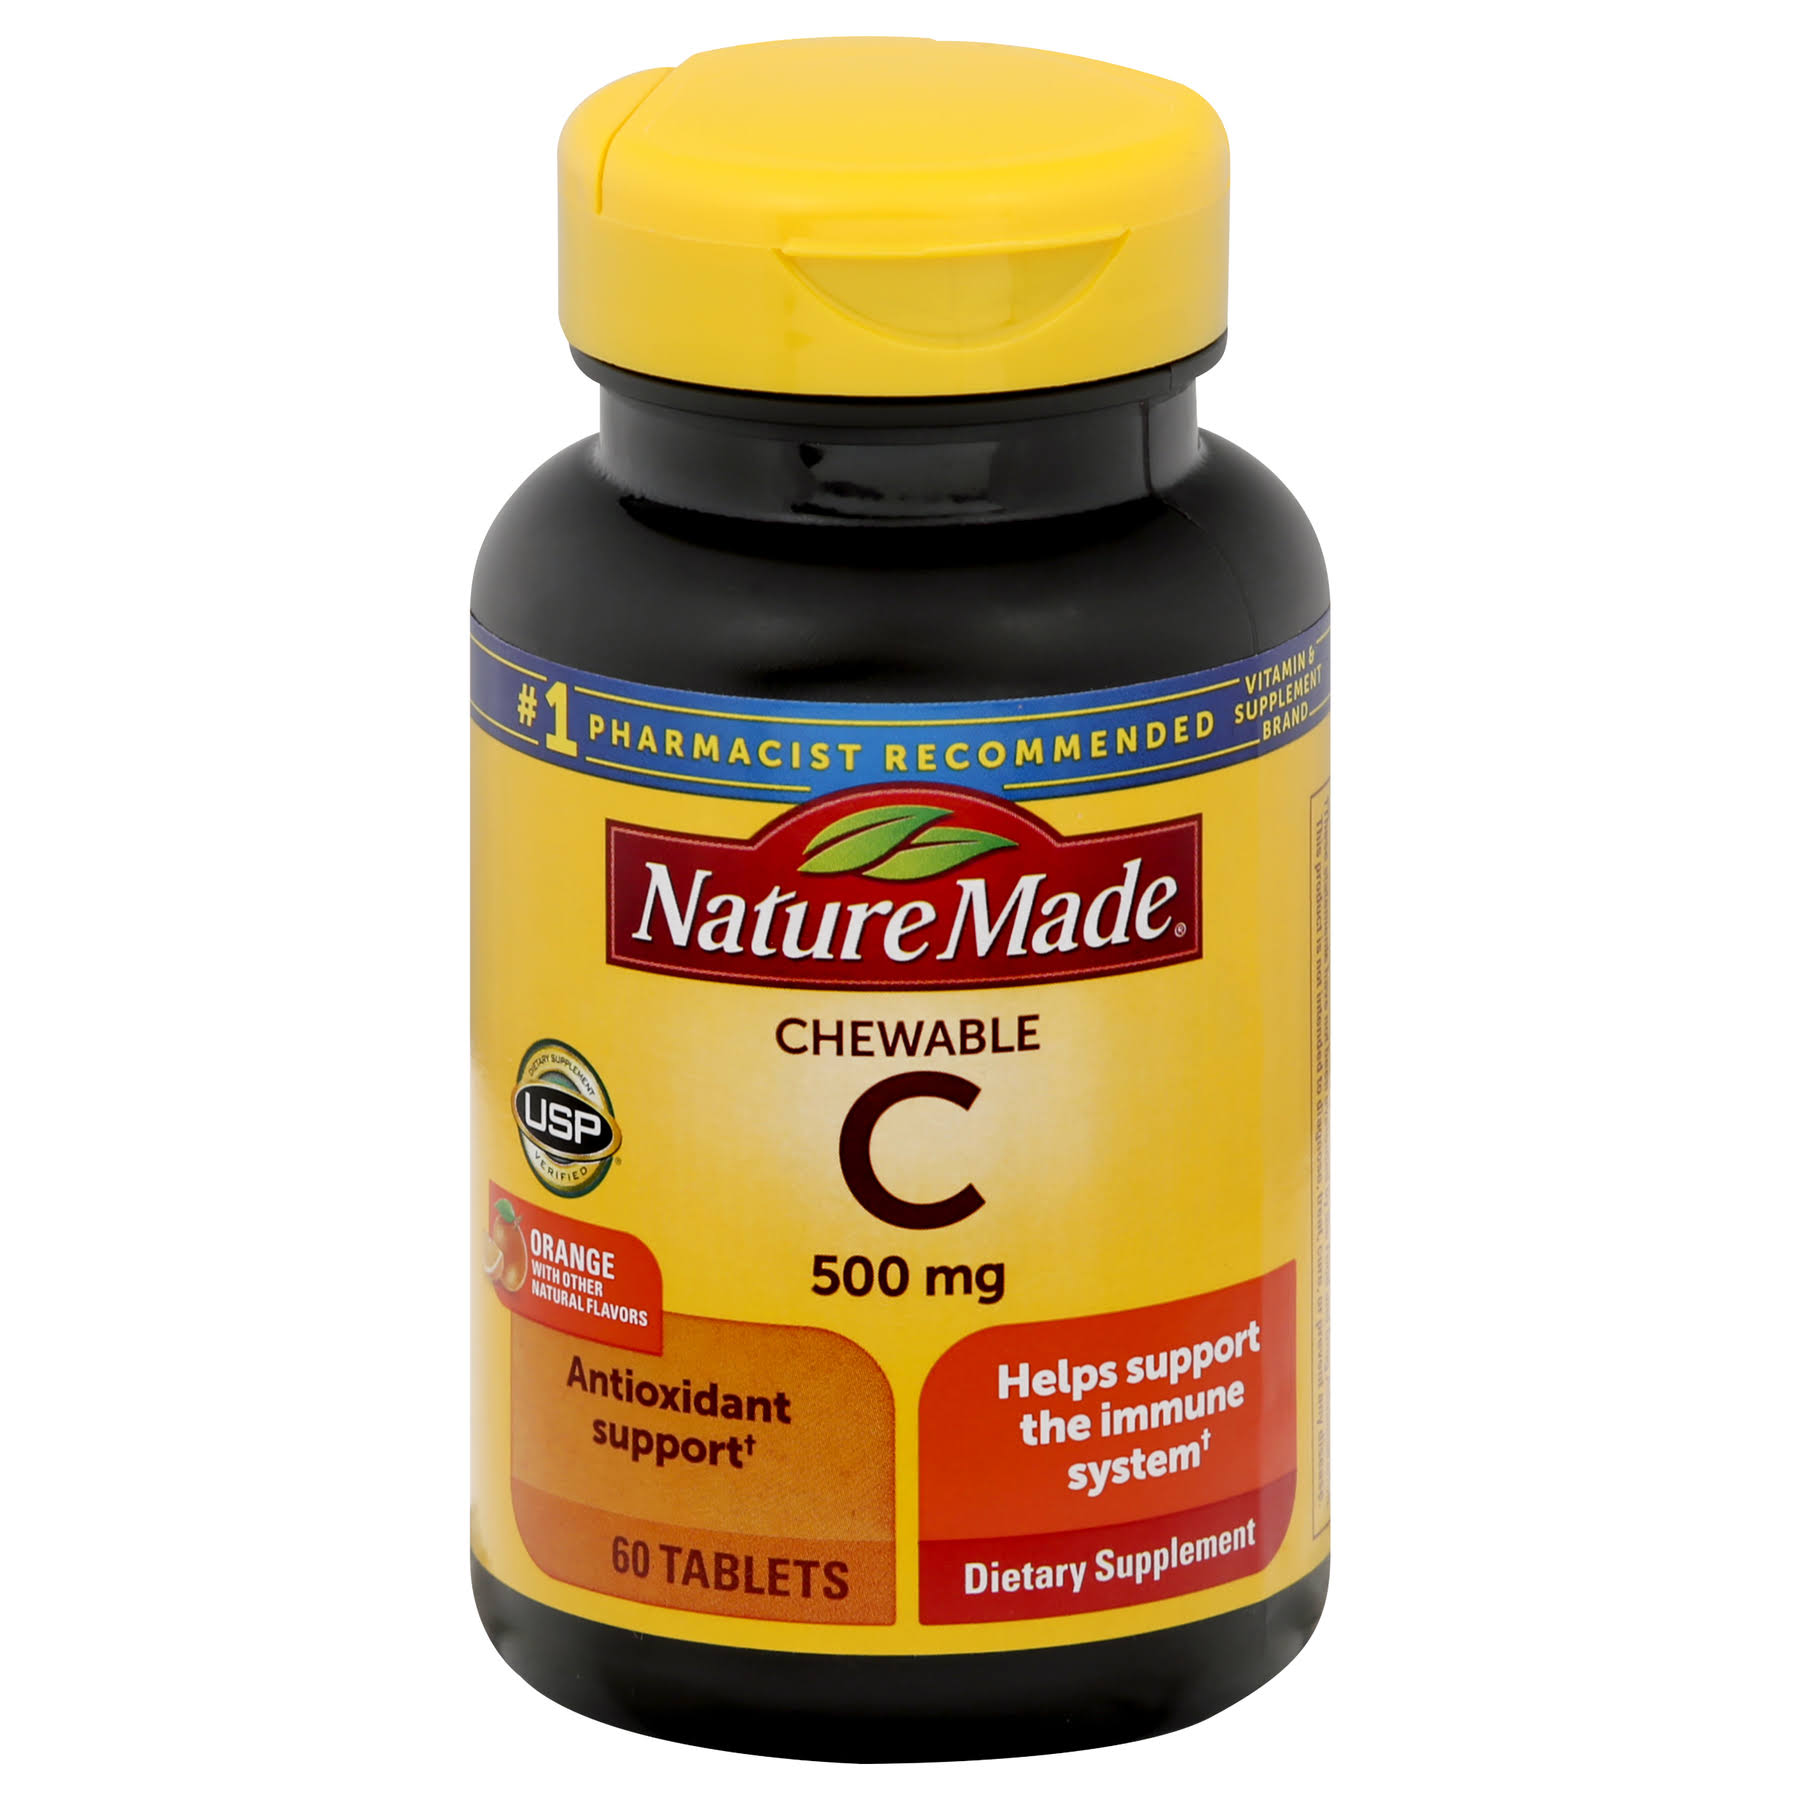 Nature Made Chewable Vitamin C Tablets - 500mg, 60ct